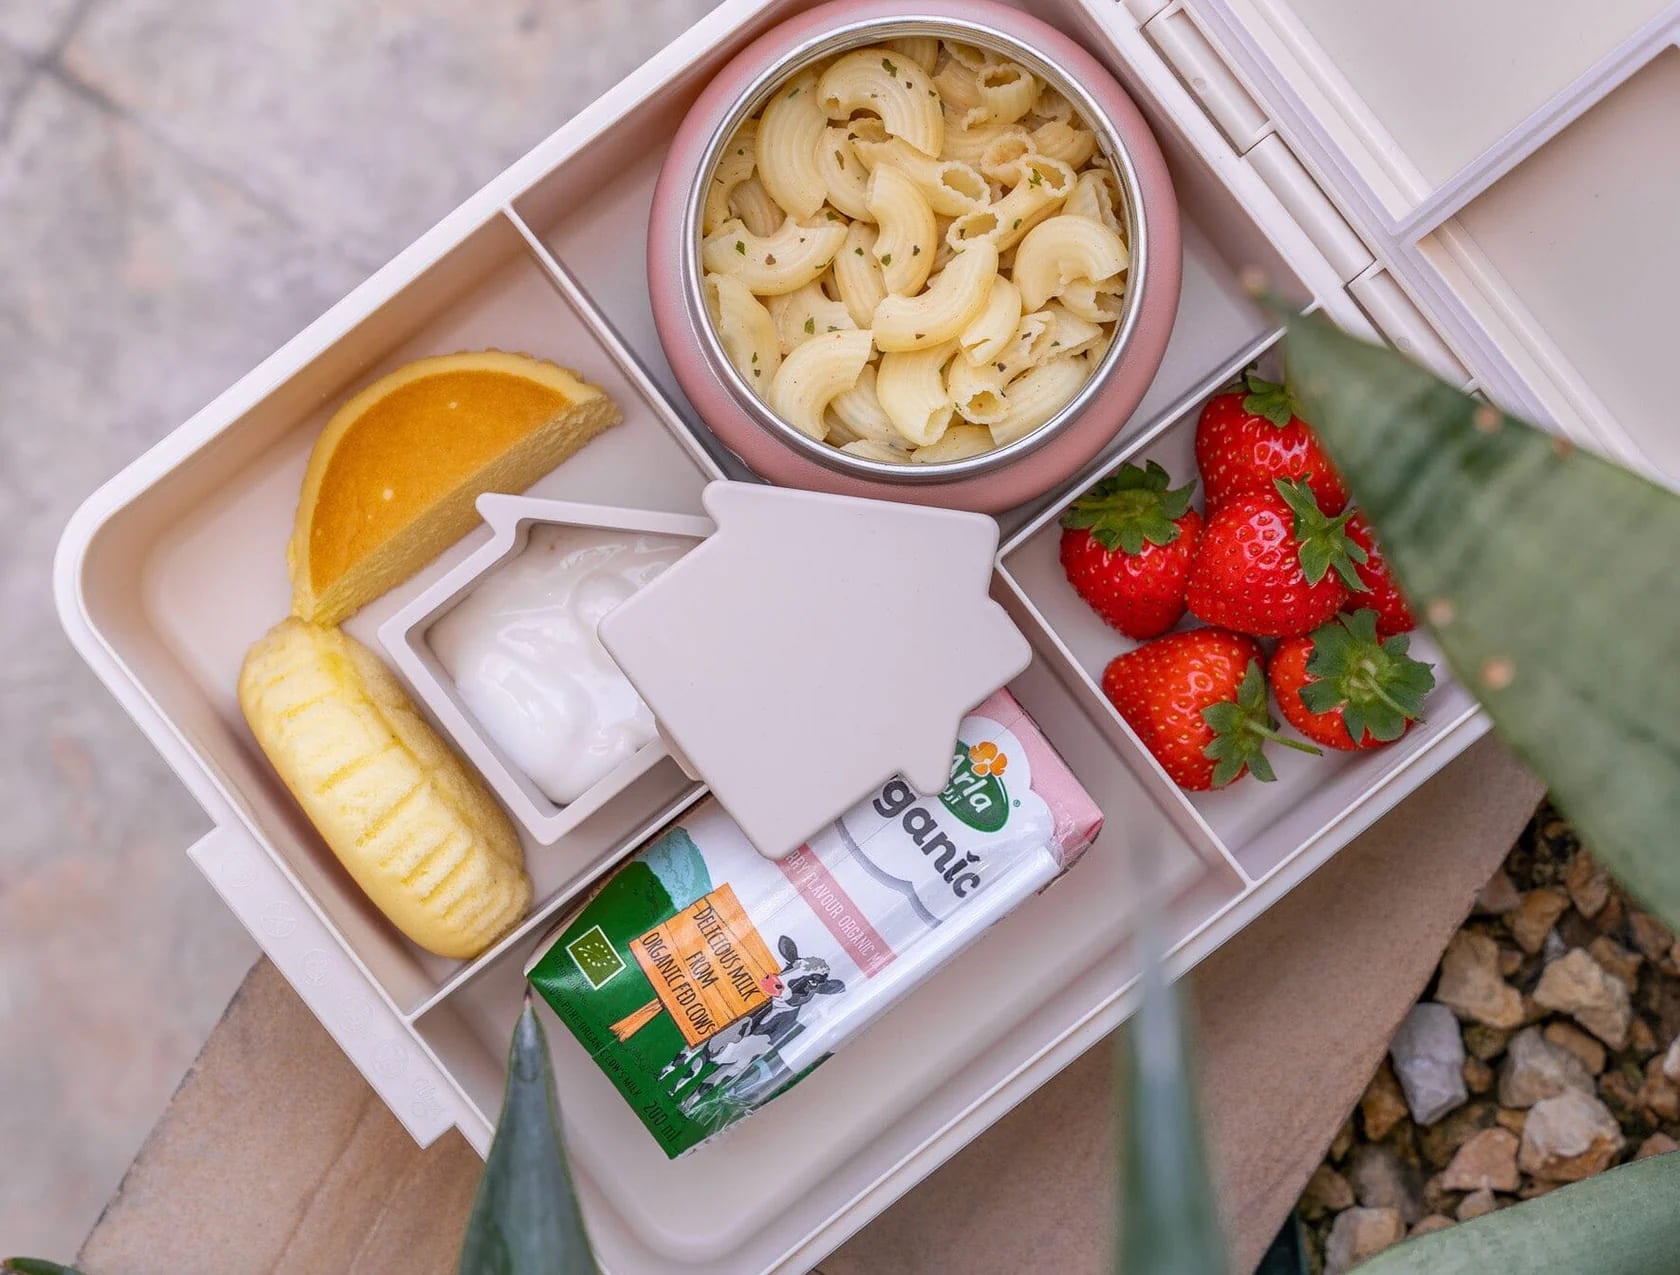 Citron Grand Lunch Box 4 Compartments with Insulated Food Jar school lunch ideas